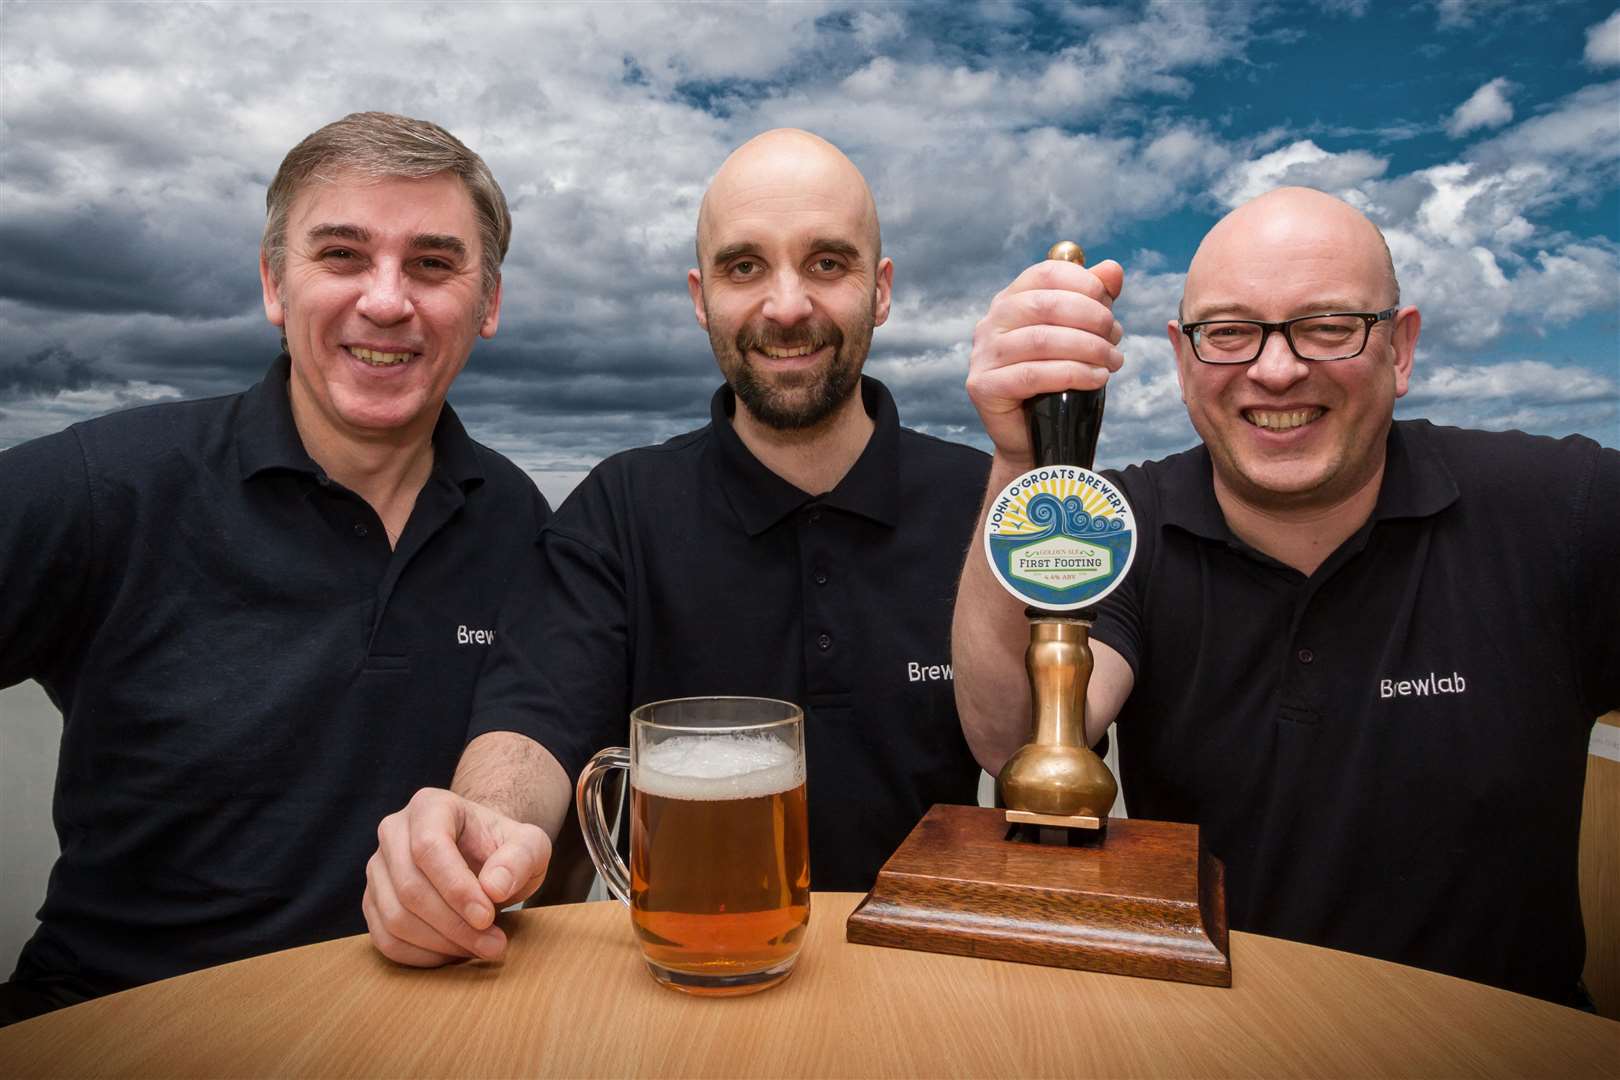 Three of the directors of John O'Groats Brewery (from left), Allan Farquhar, Simon Cottam and John Mainprize. The other director is Andrew Mowat.